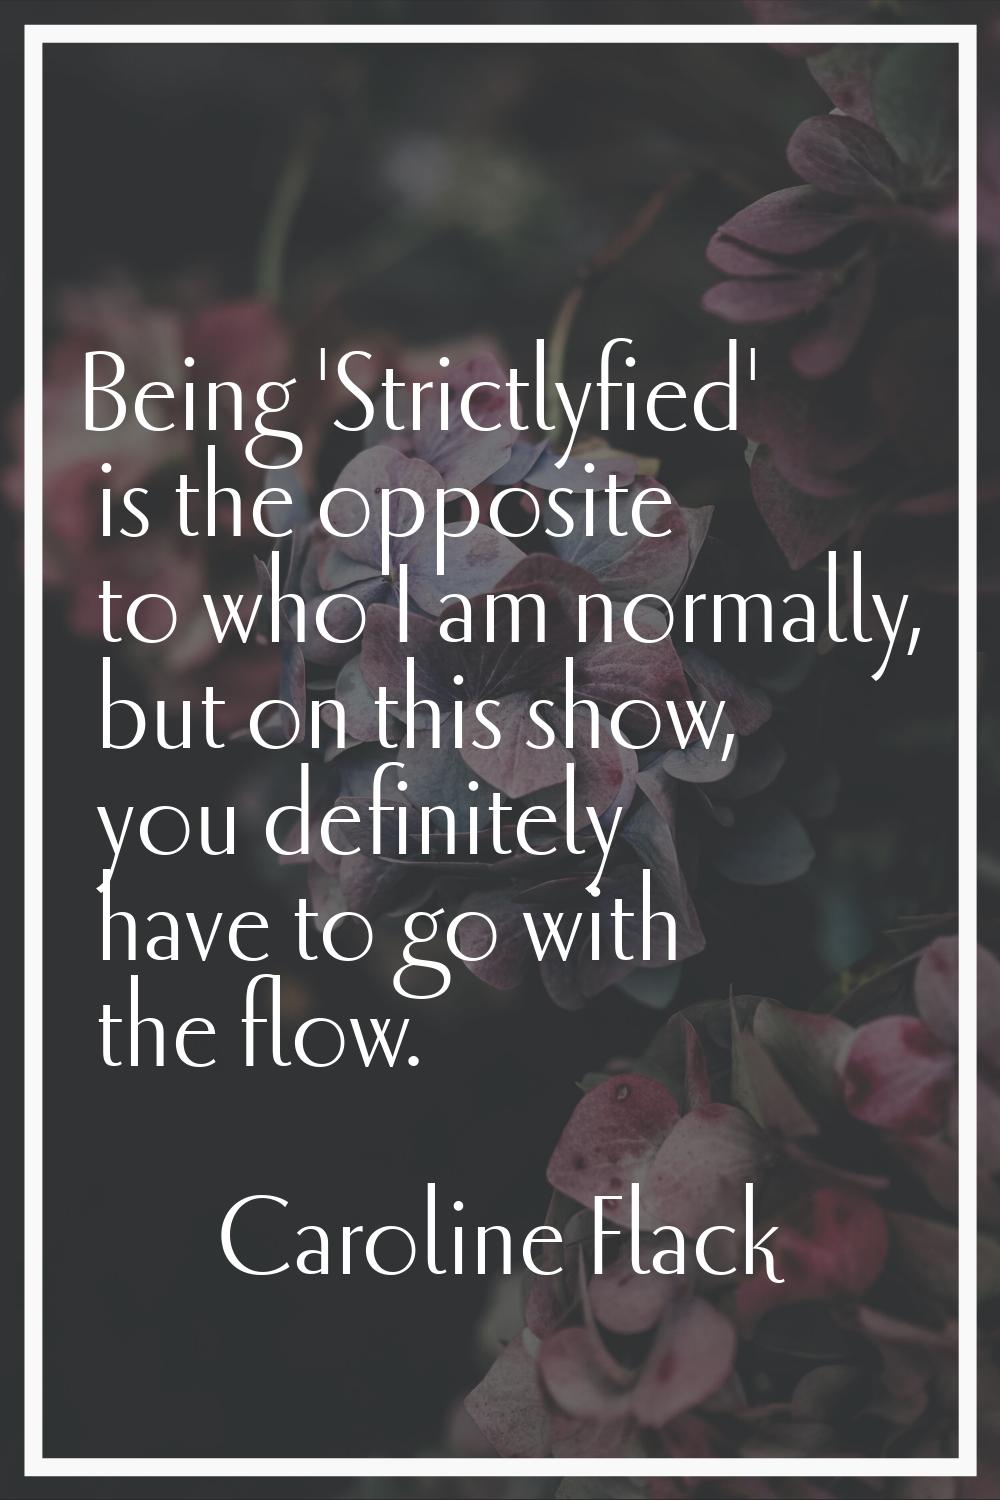 Being 'Strictlyfied' is the opposite to who I am normally, but on this show, you definitely have to